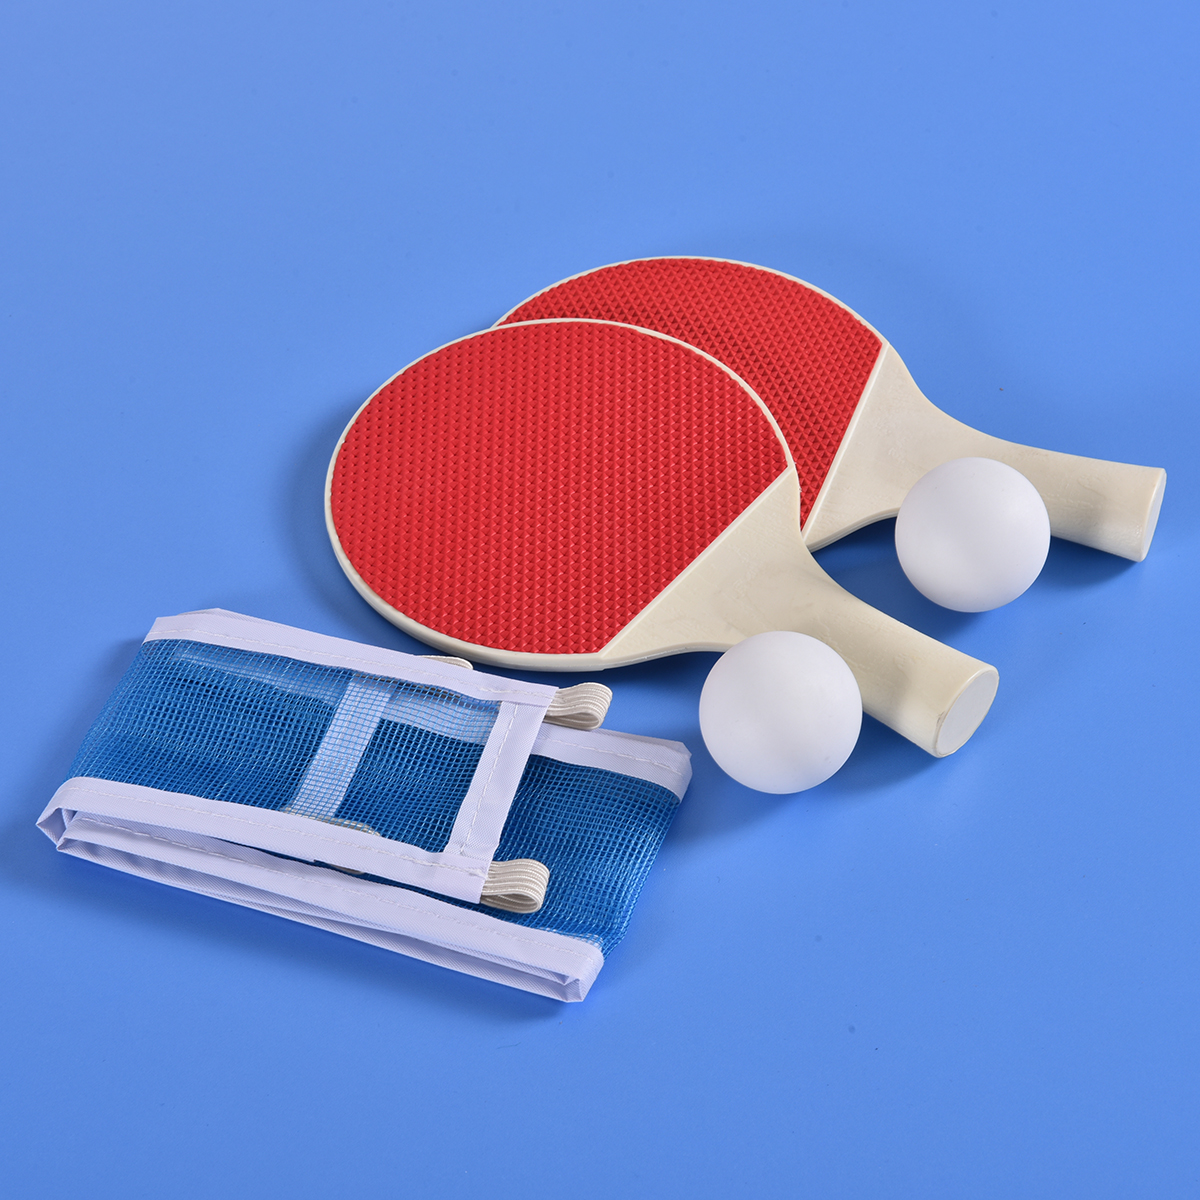 Topbuy Table Tennis Ping Pong Folding Table Portable Sports gift